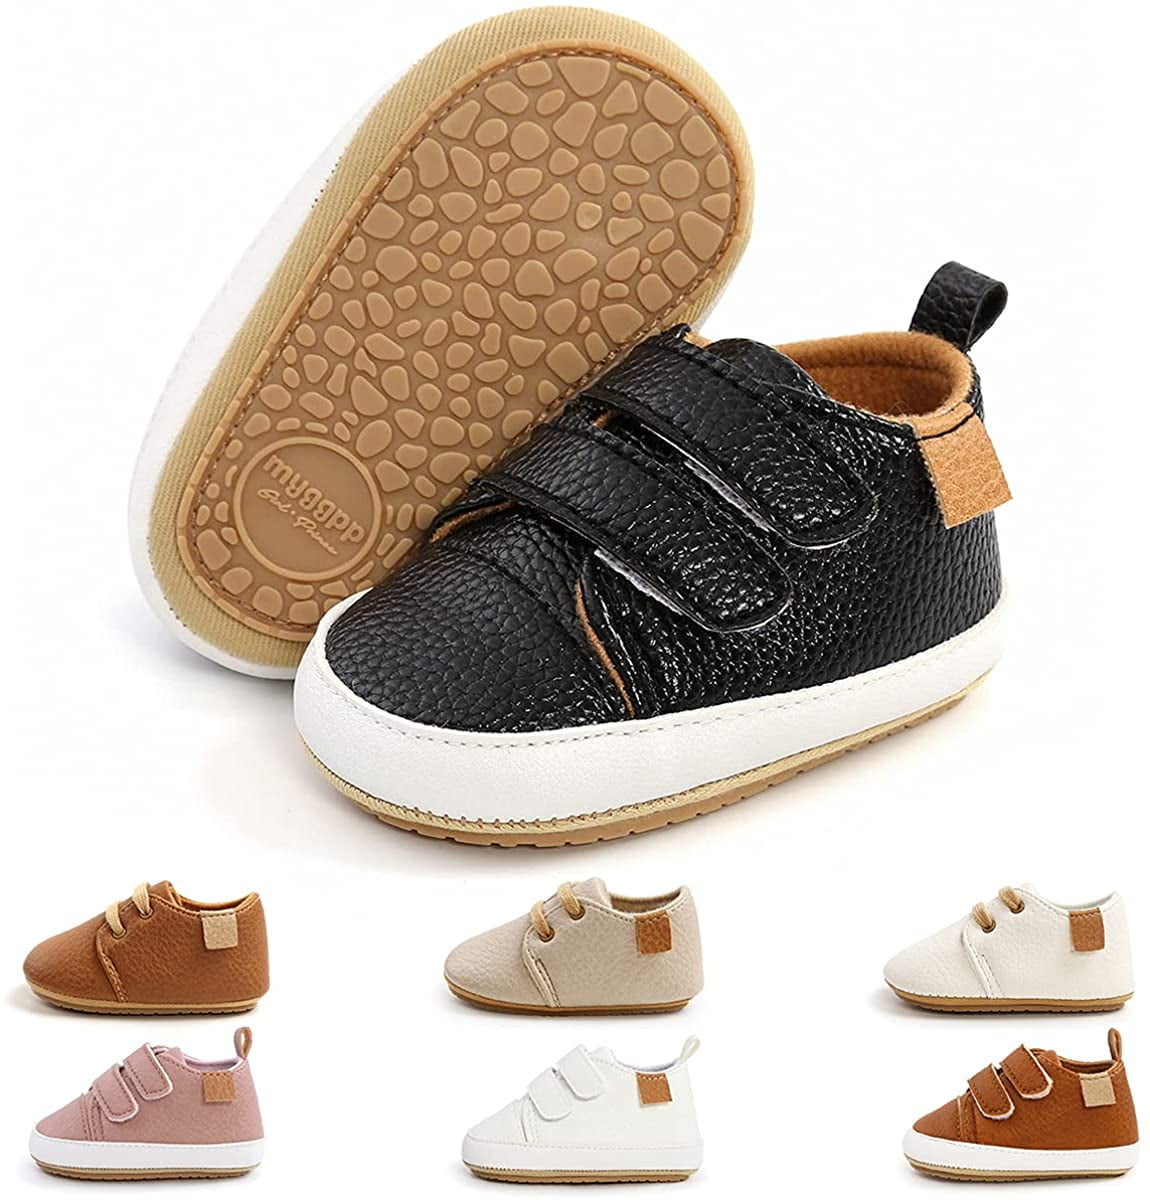 Baby Boy Clothes Quality Vegan Leather Baby Shoes Schoenen Newborn Moccasins Shoes Baby Moccasins Toddler Loafers Shoes Baby Boy Wedding Shoes 